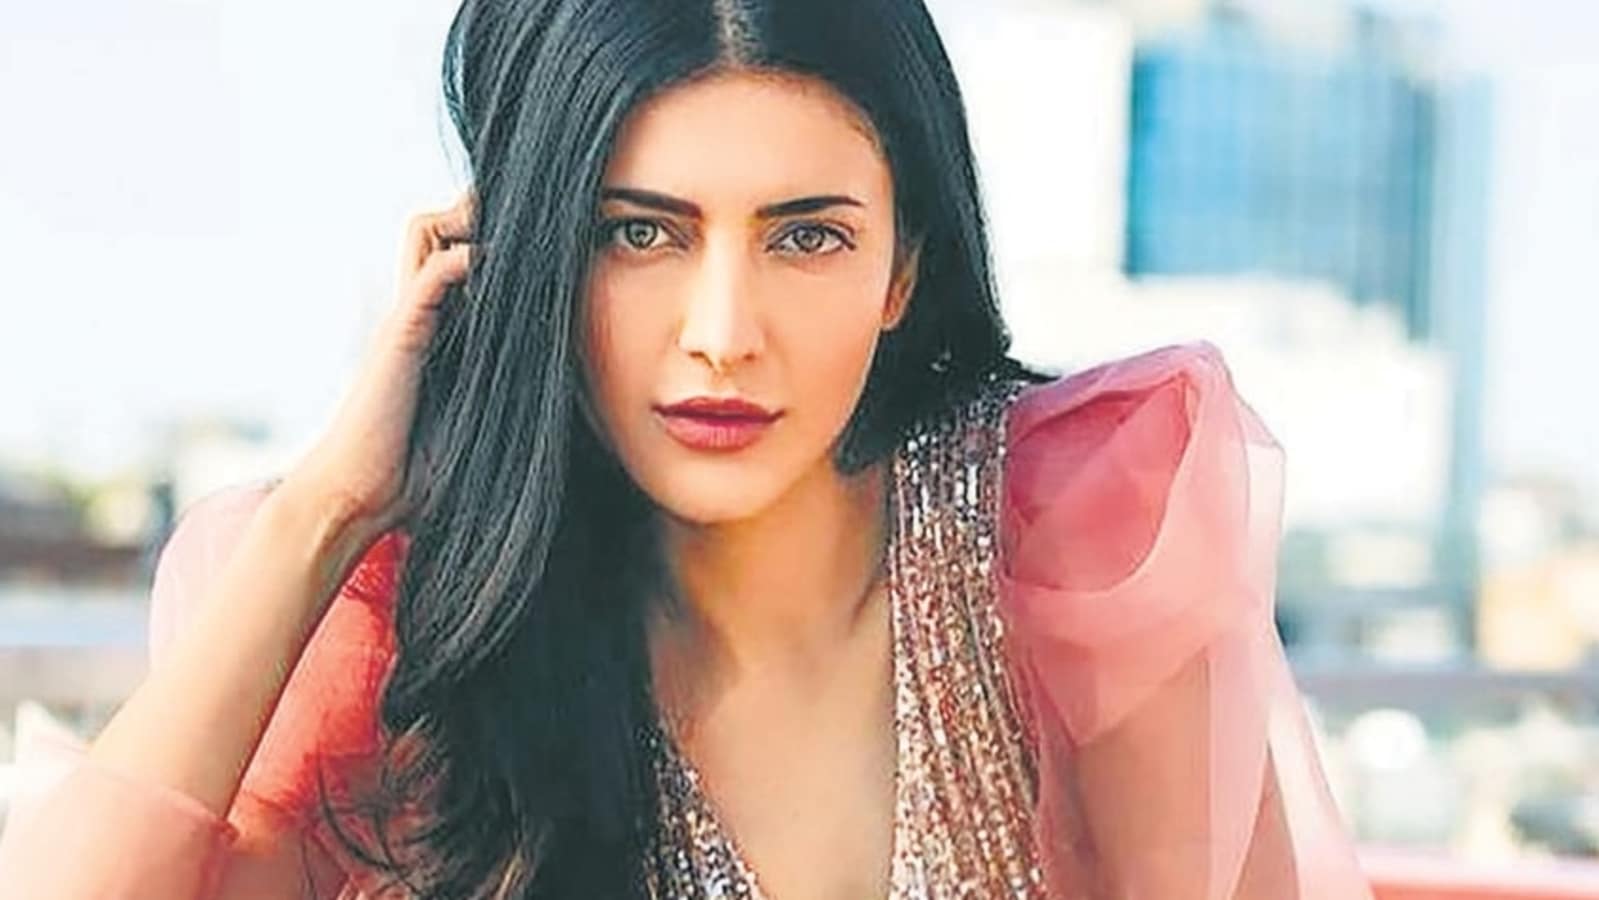 Shruti Haasan opens up on dealing with PCOS, endometriosis: ‘My body isn’t perfect right now but heart is’